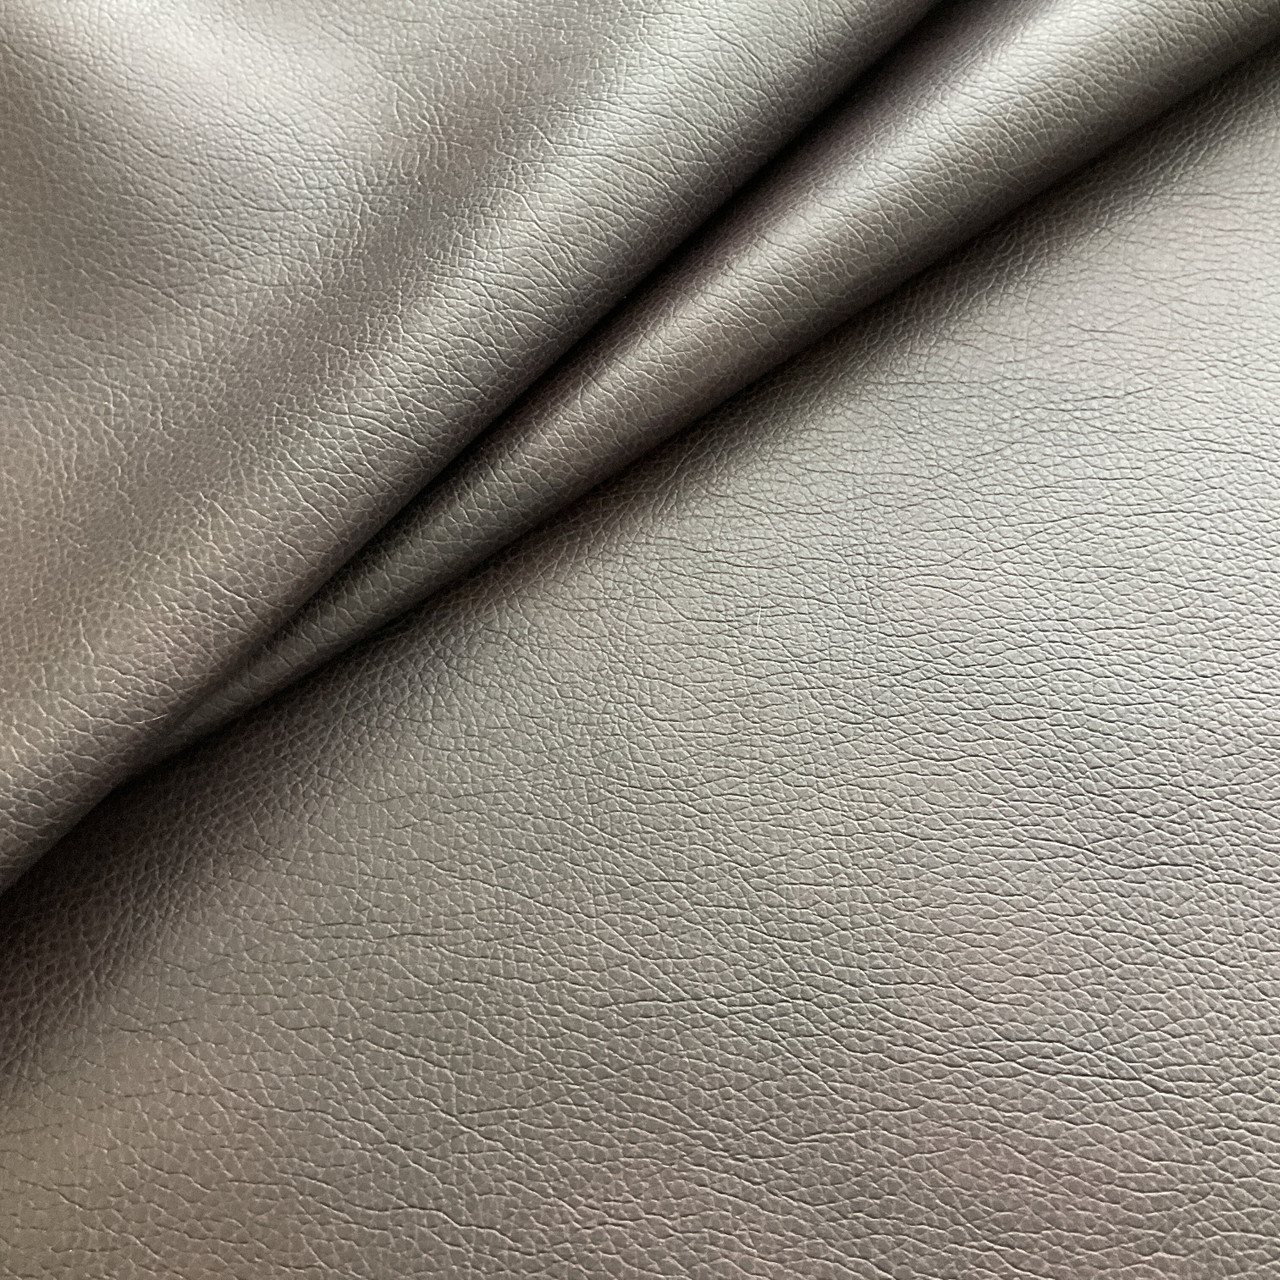 Breathable Faux Leather Grey | Very Heavyweight Faux Leather, Vinyl Fabric  | Home Decor Fabric | 54 Wide